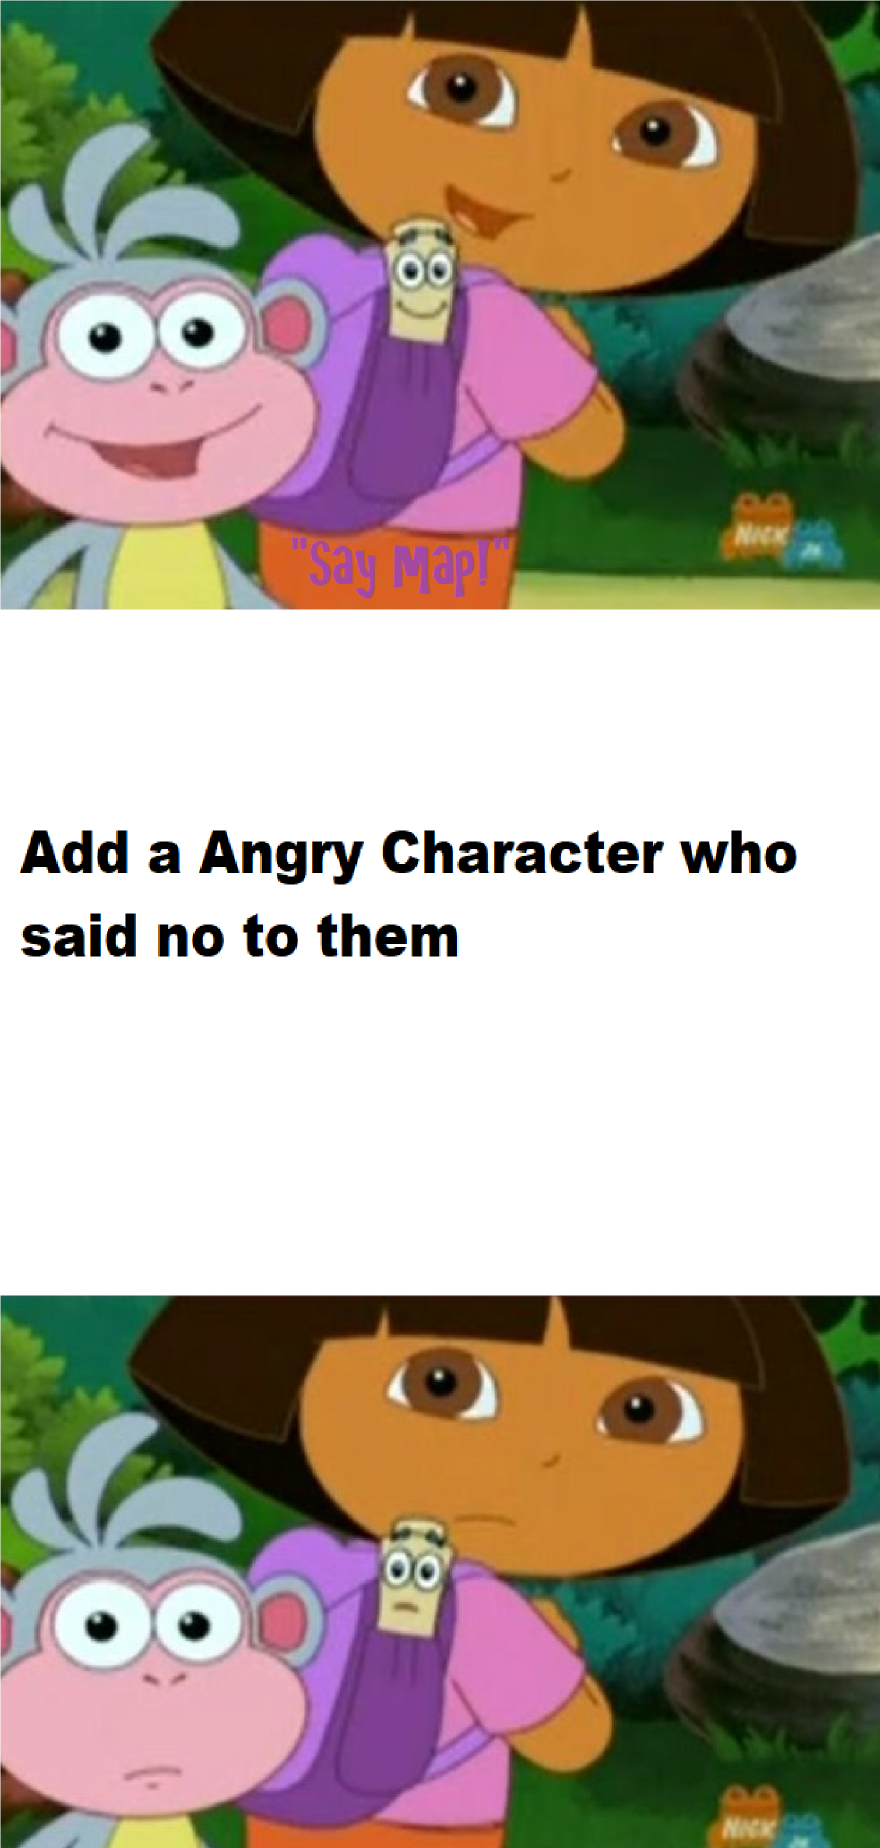 Who said no to Dora, Boots, and Map Blank Meme Template